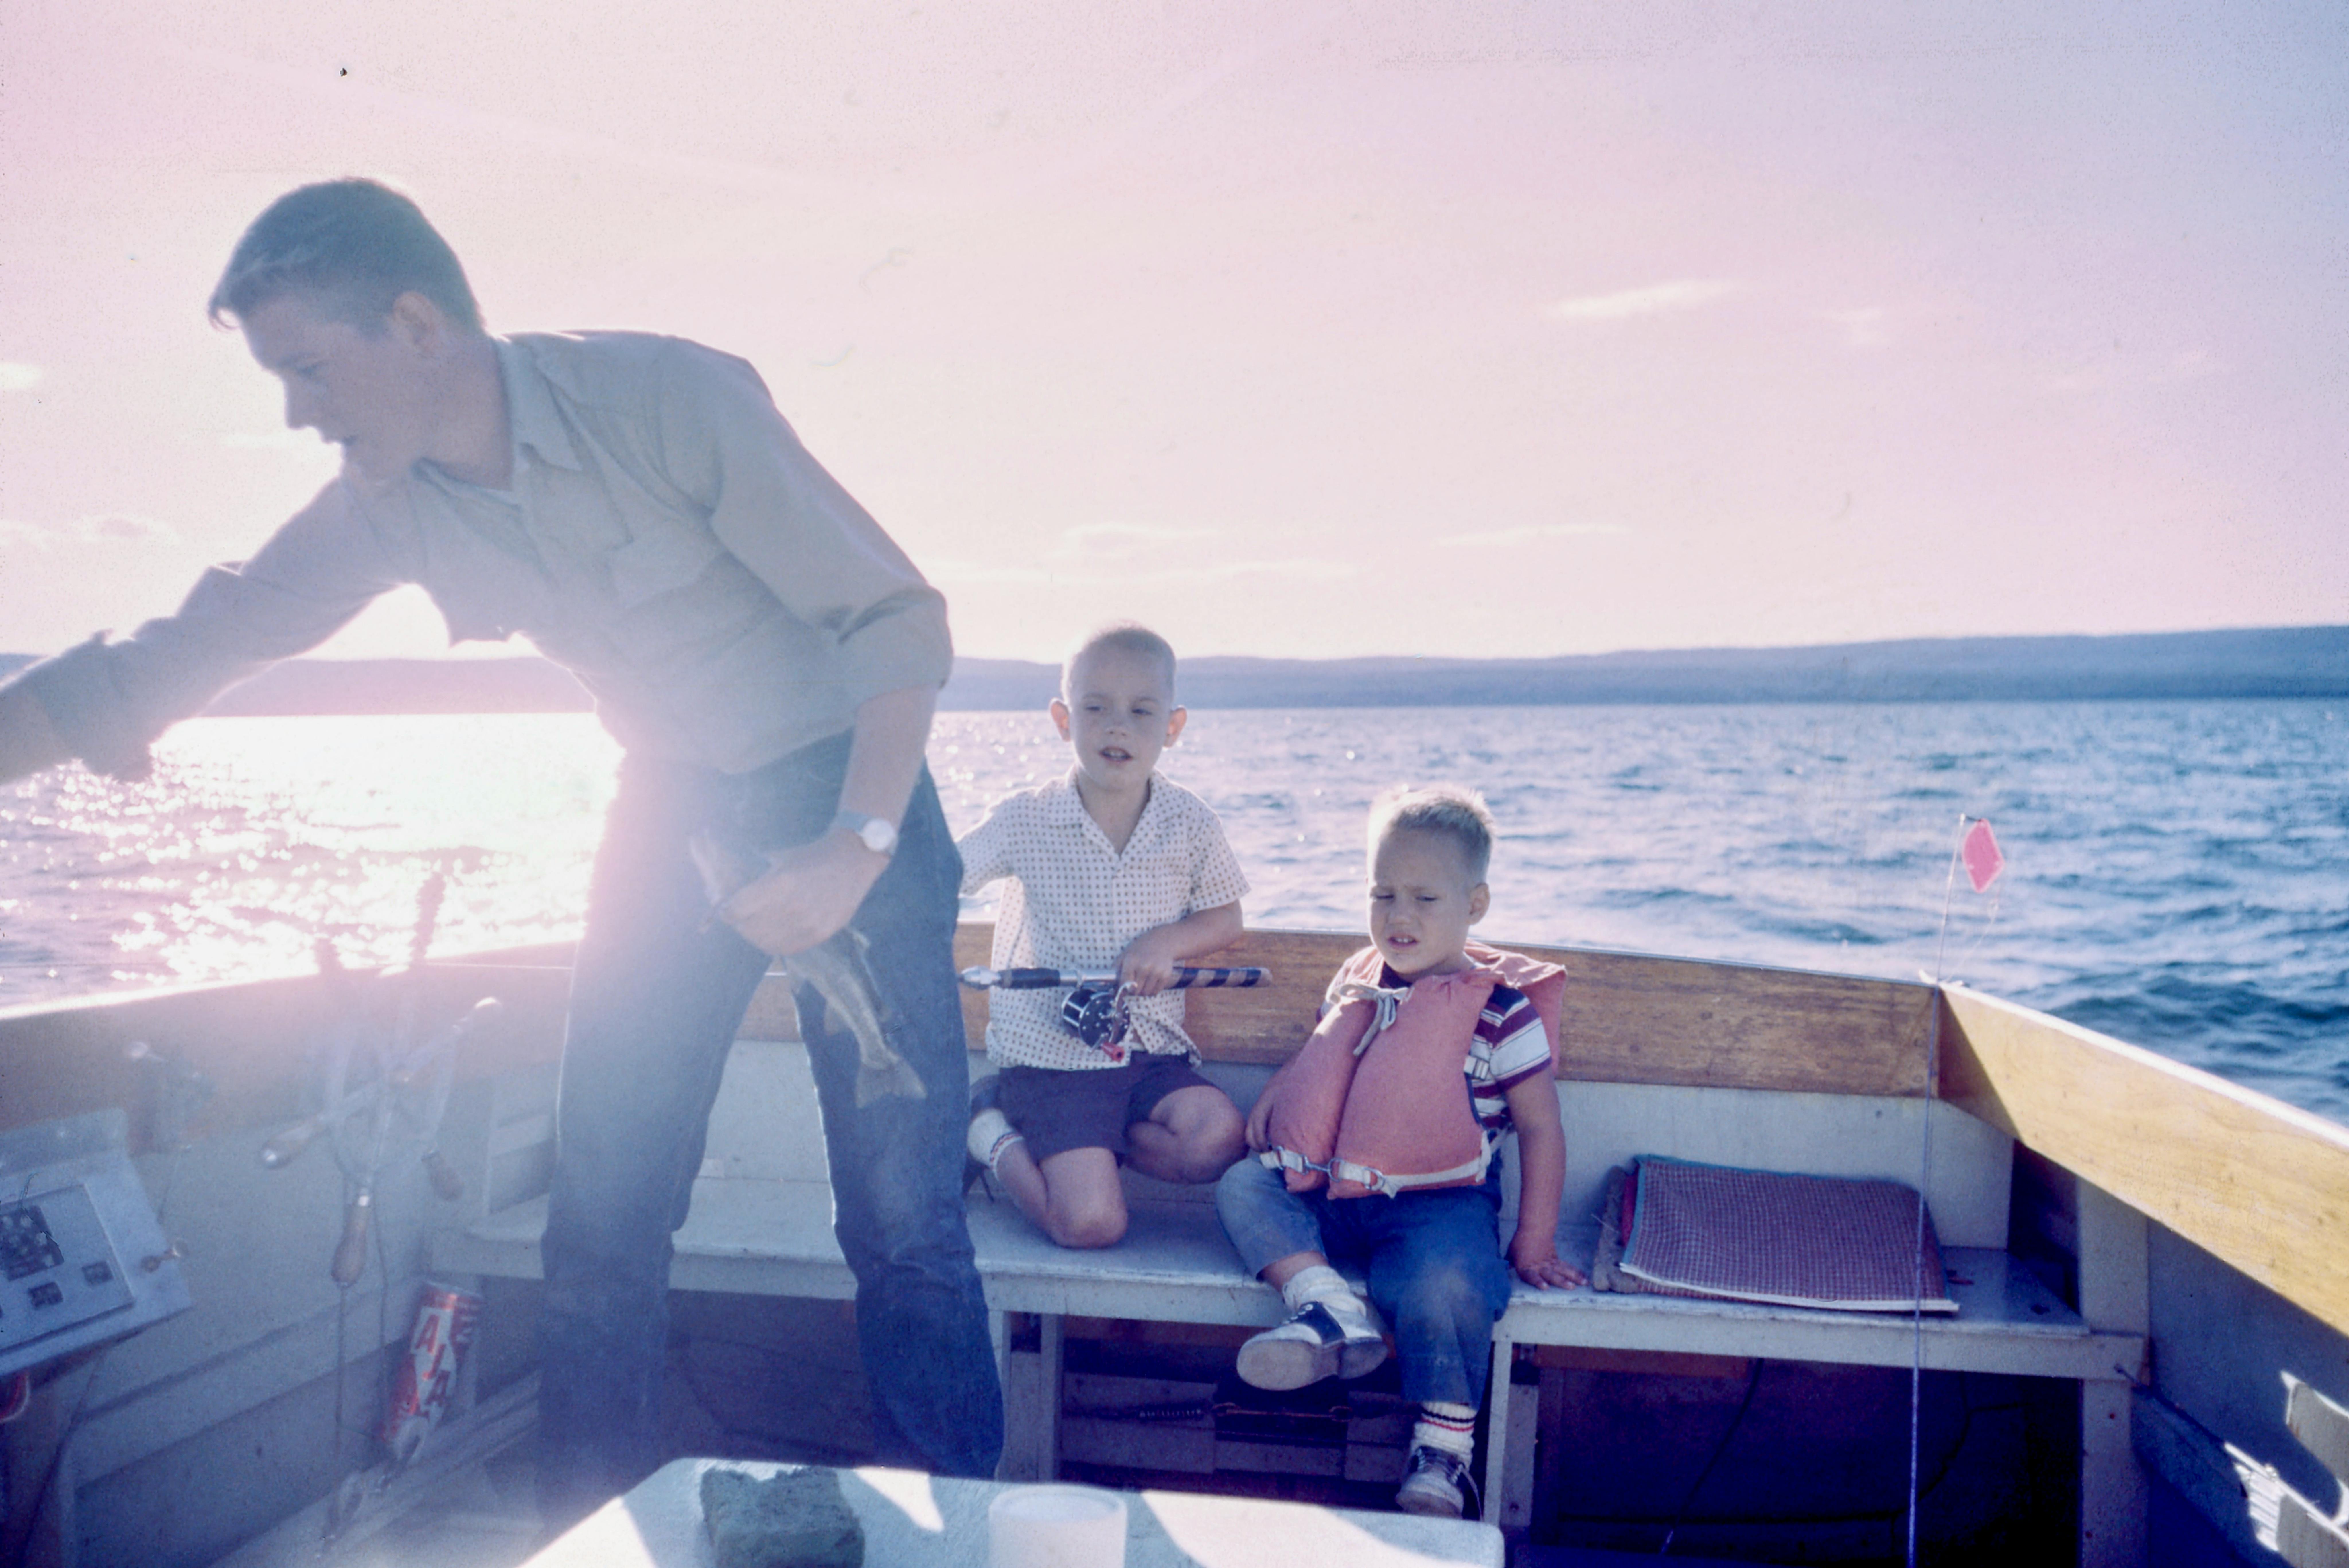 A man stands on a boat, holding a fish in one hand and leaning over to grab something with the other. Two young children, one in a life jacket, sit on a bench at the back of the boat and watch. 